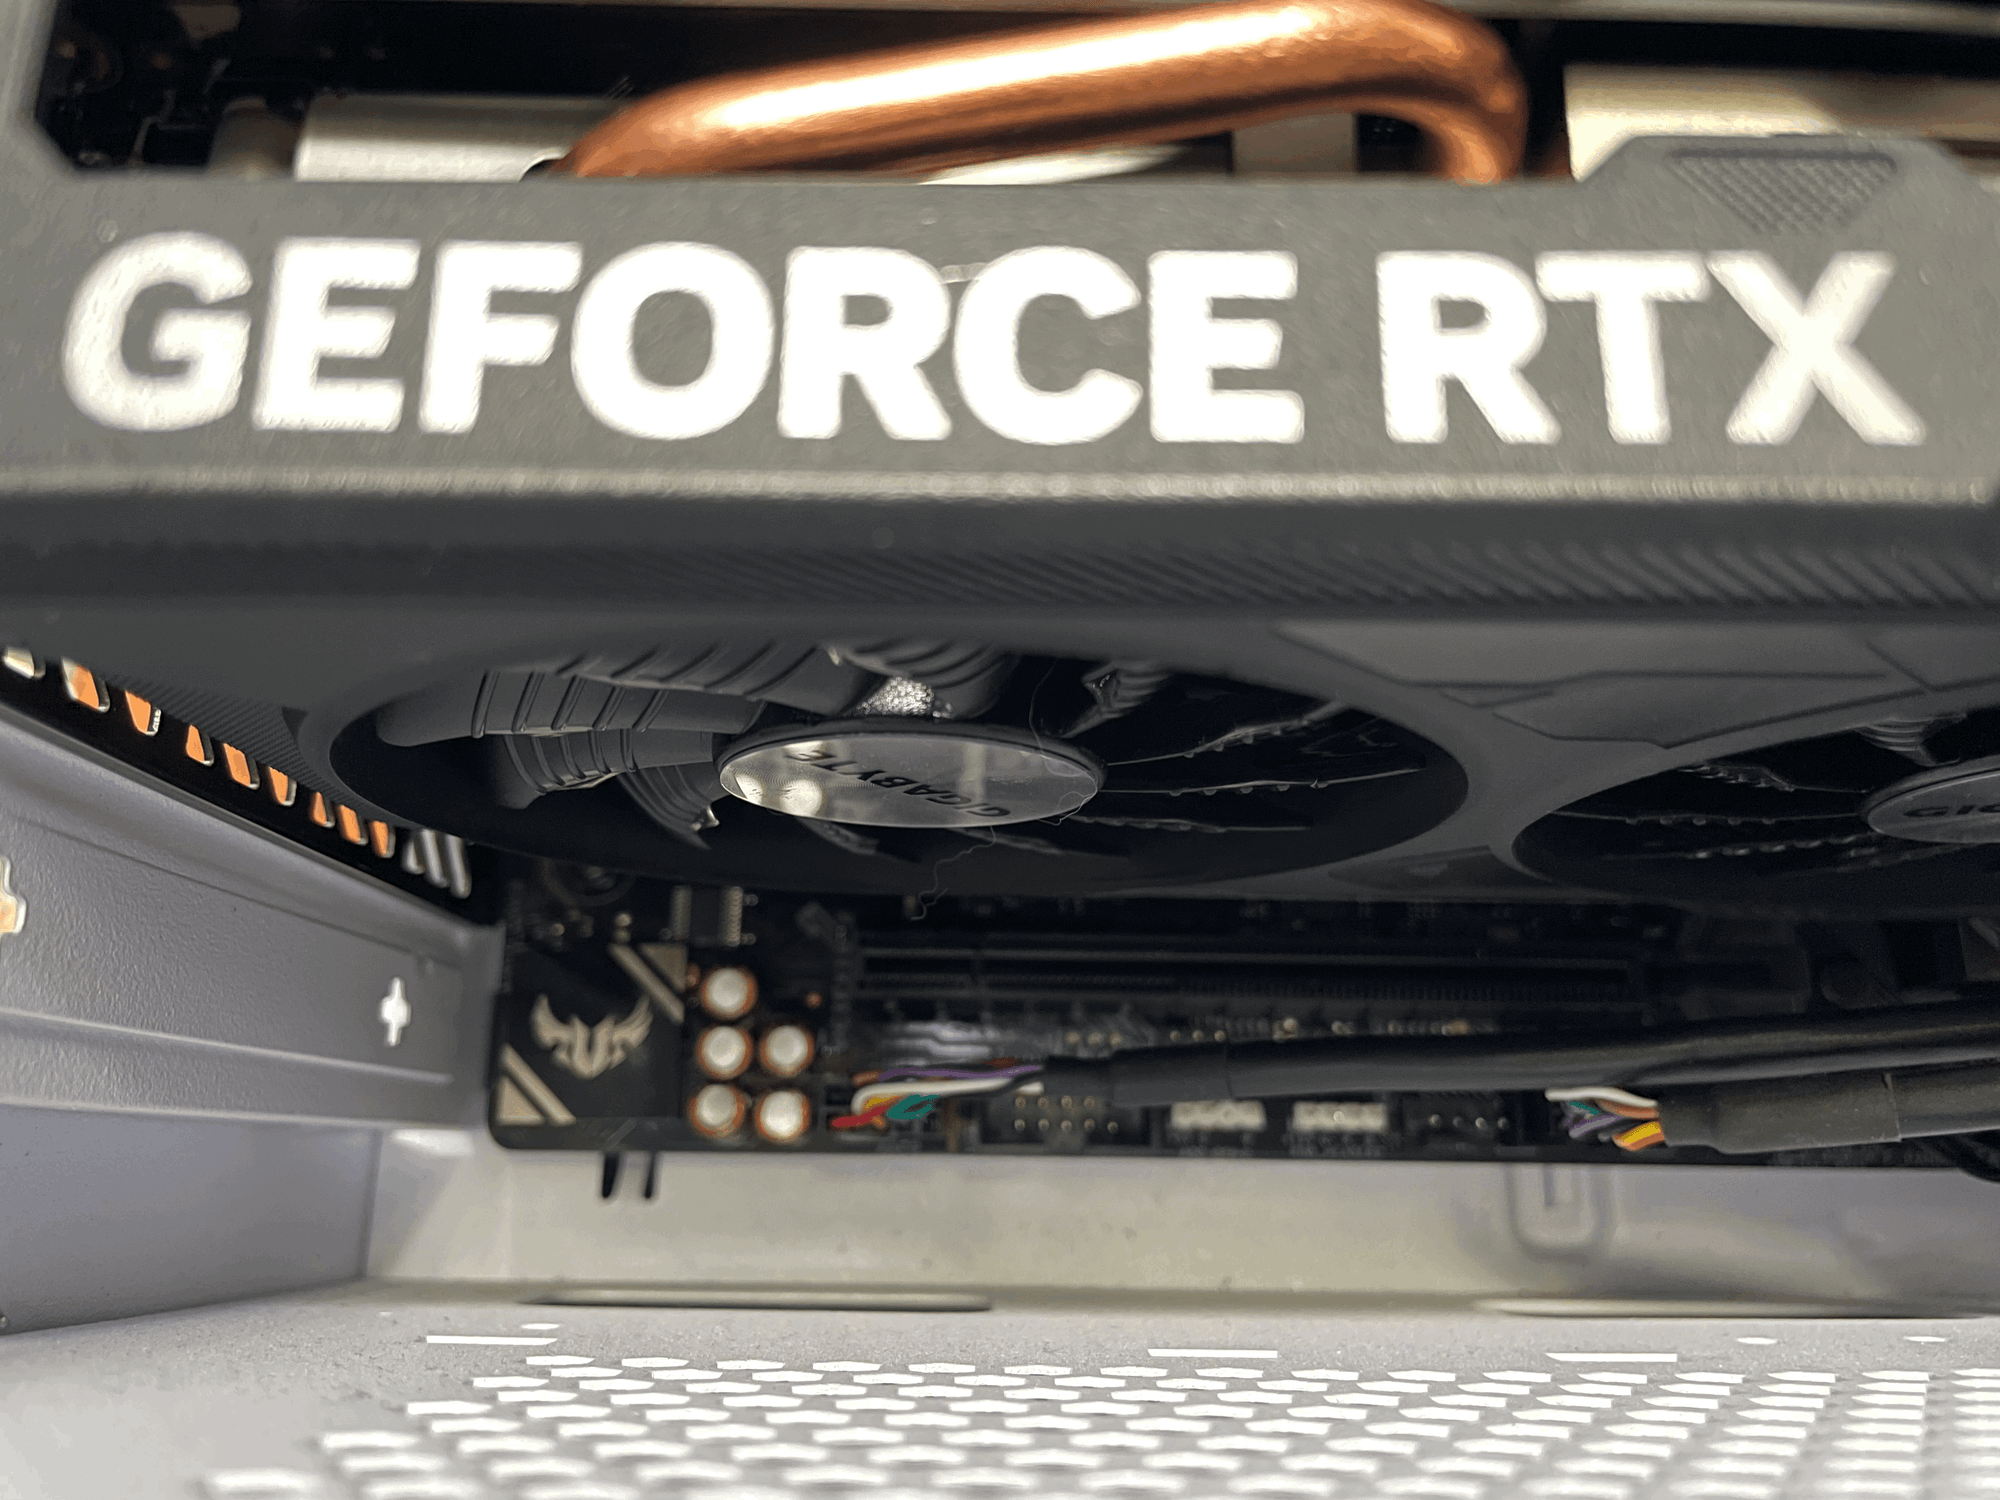 A close up picture of a graphics card slotted into the motherboard, seen from below, the words GEFORCE RTX on the side